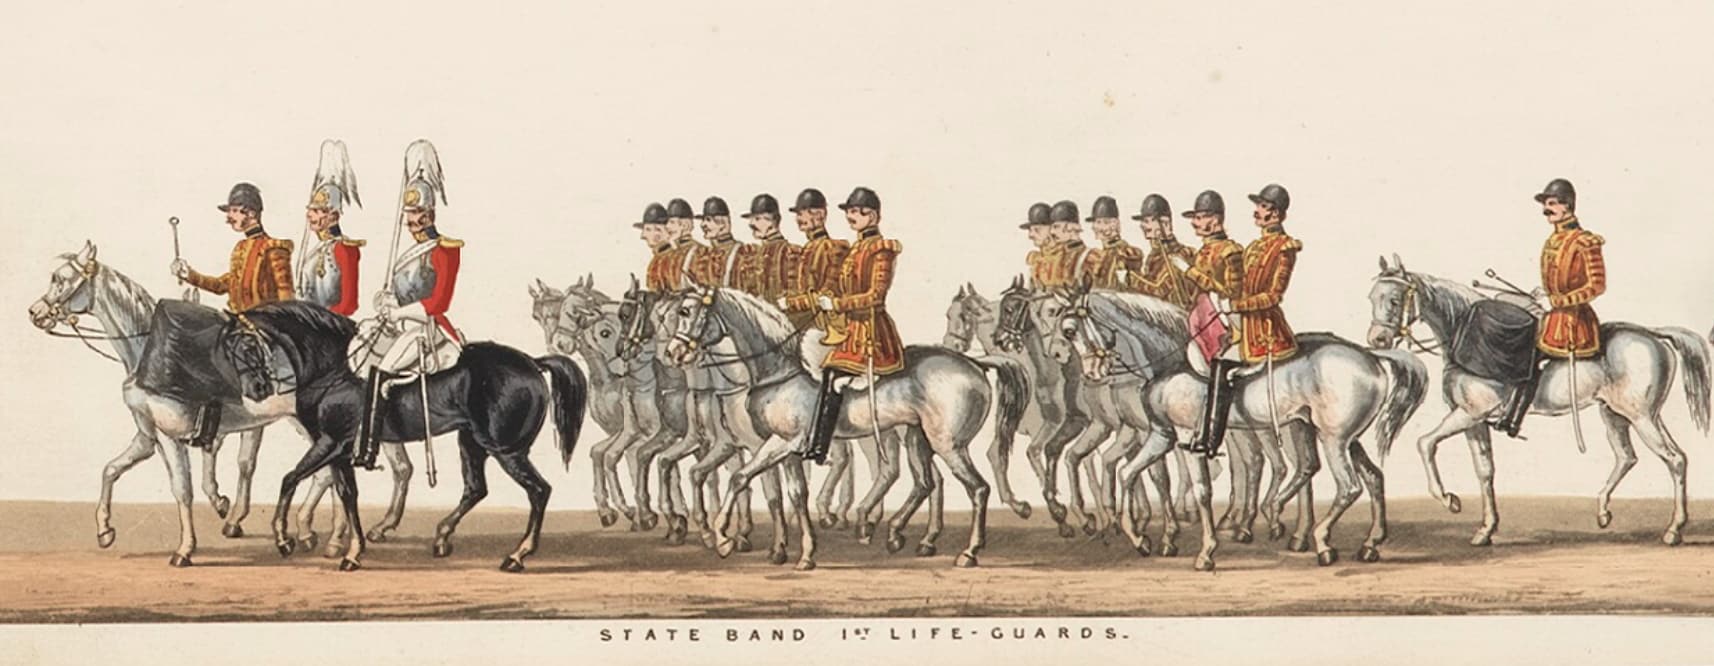 State band of the 1st Life Guards, at the funeral of the duke of Wellington, London, 18 November 1852